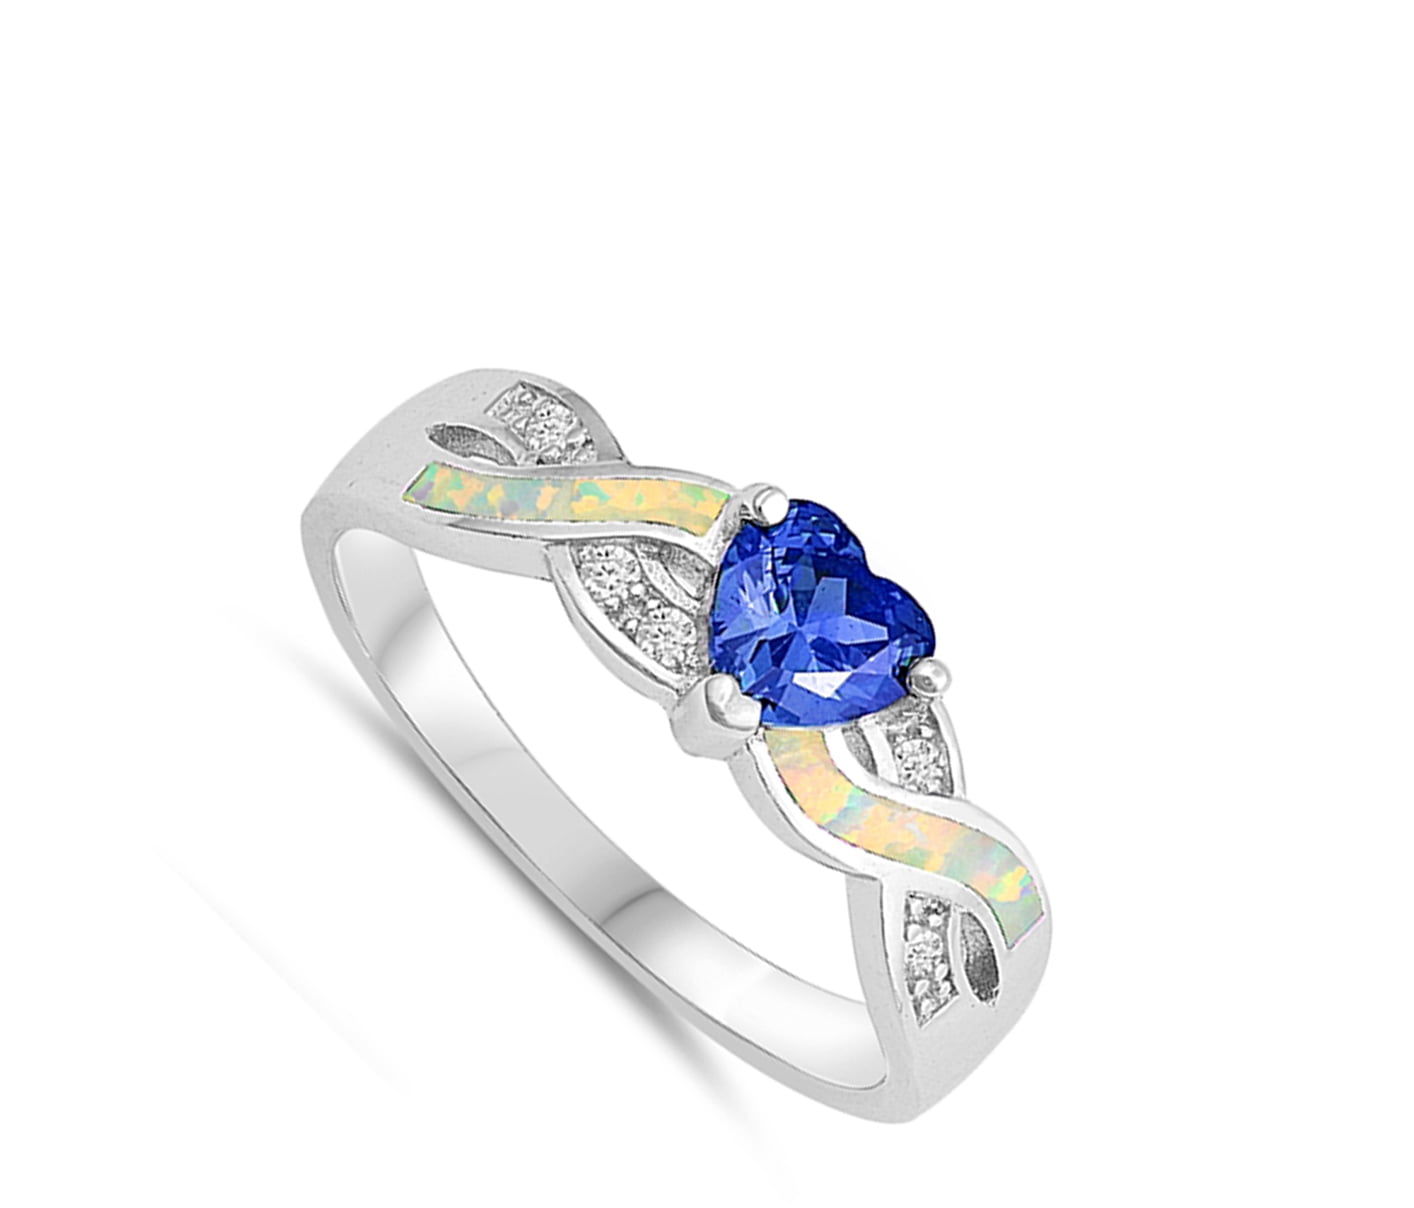 Blue Sapphire CZ White Lab Opal Heart Infinity Sterling Silver Ring Sizes 4-10